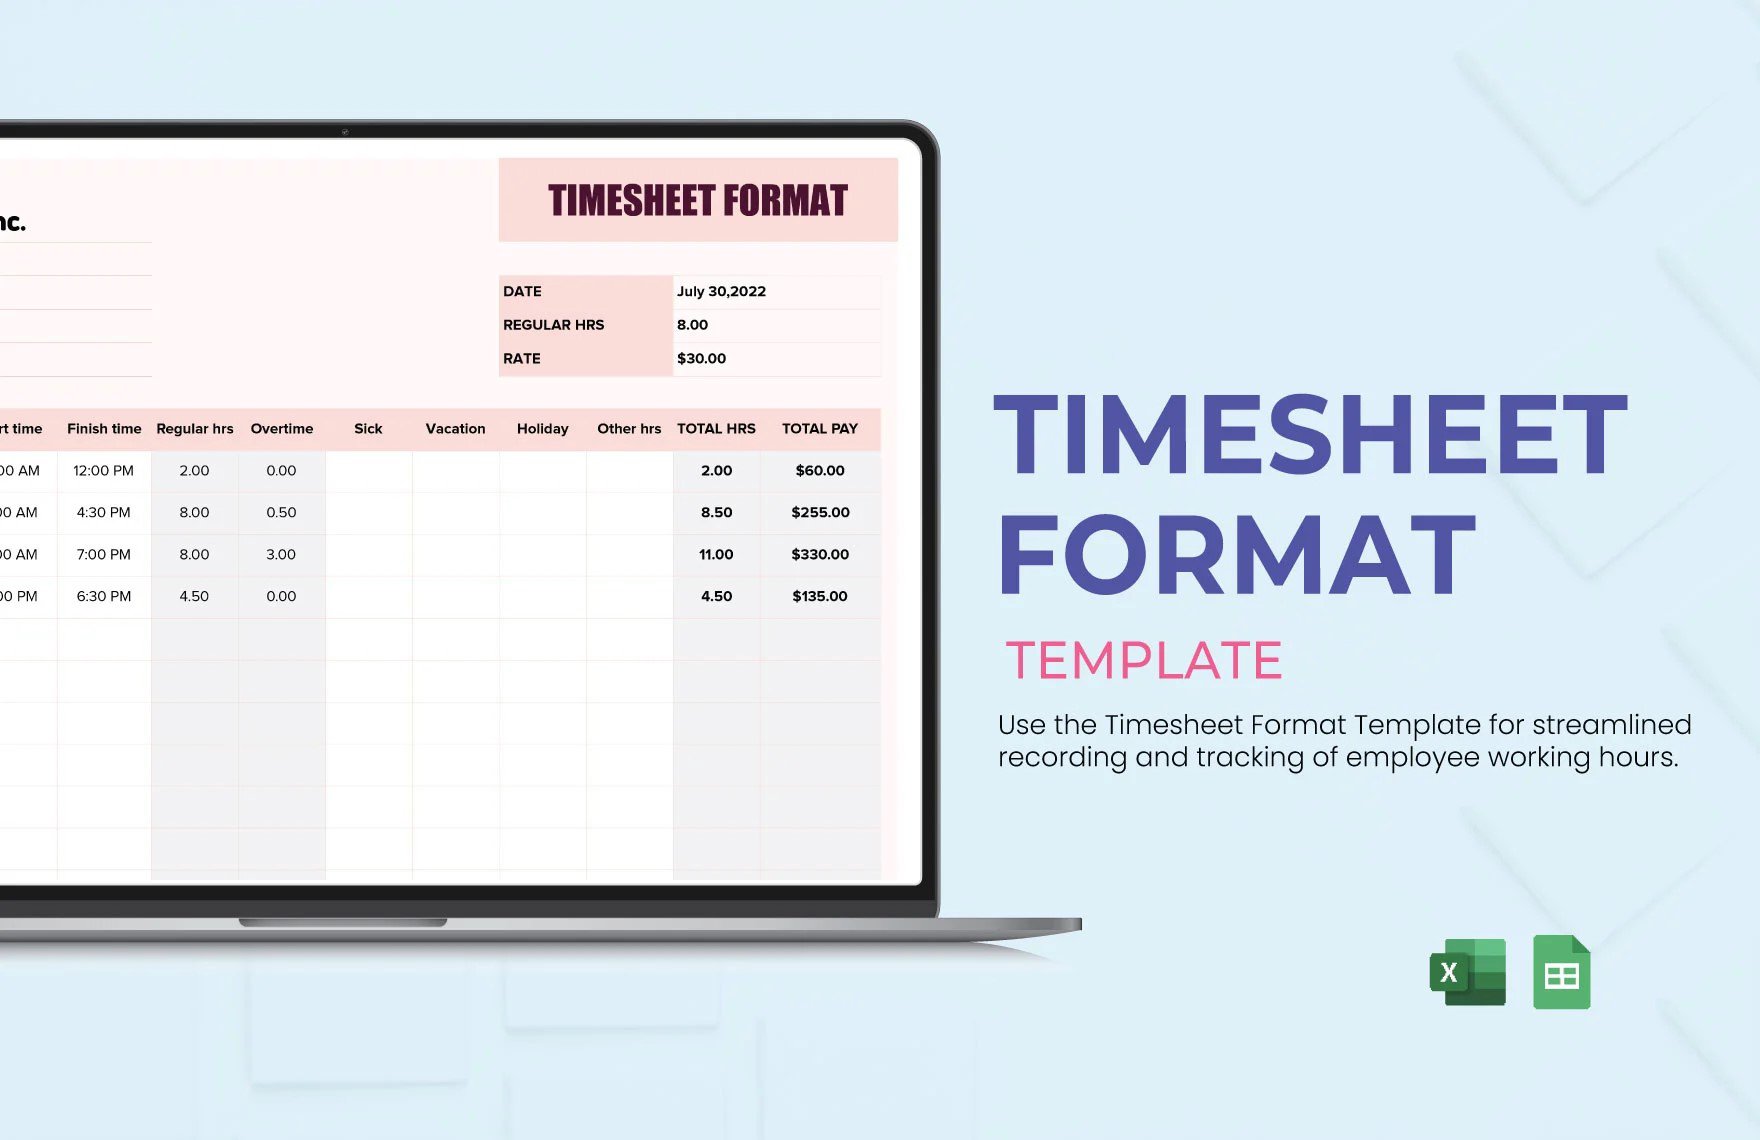 Free Timesheet Format Template in Excel, Google Sheets